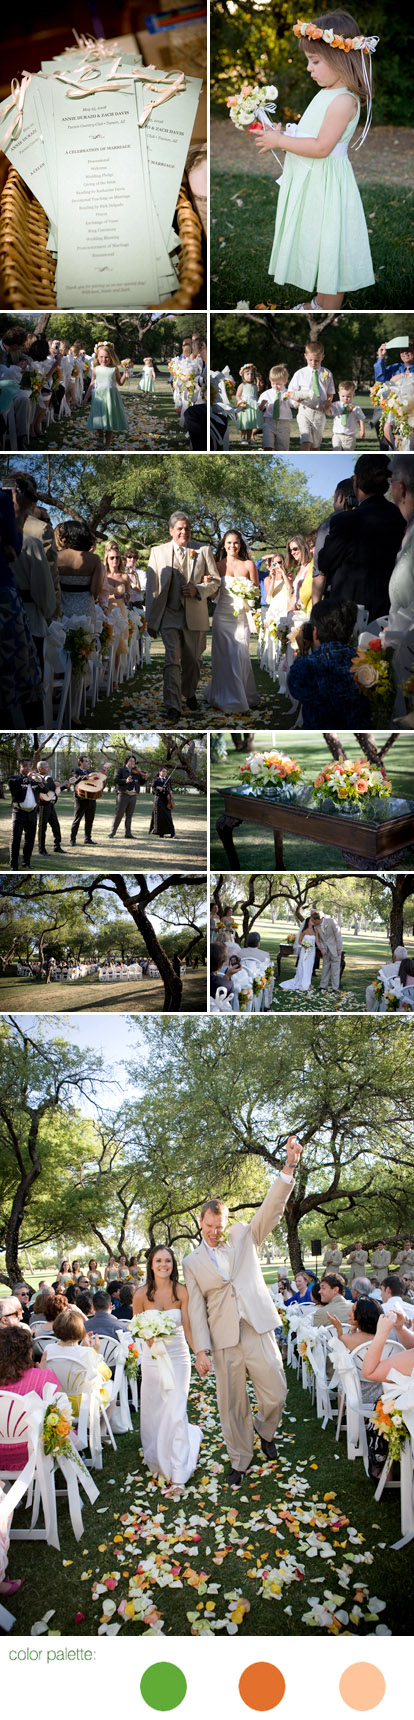 Tuscan, Arizona outdoor wedding ceremony with mariachi band, orange and green wedding color palette, images by Roberto Valenzuela Photography